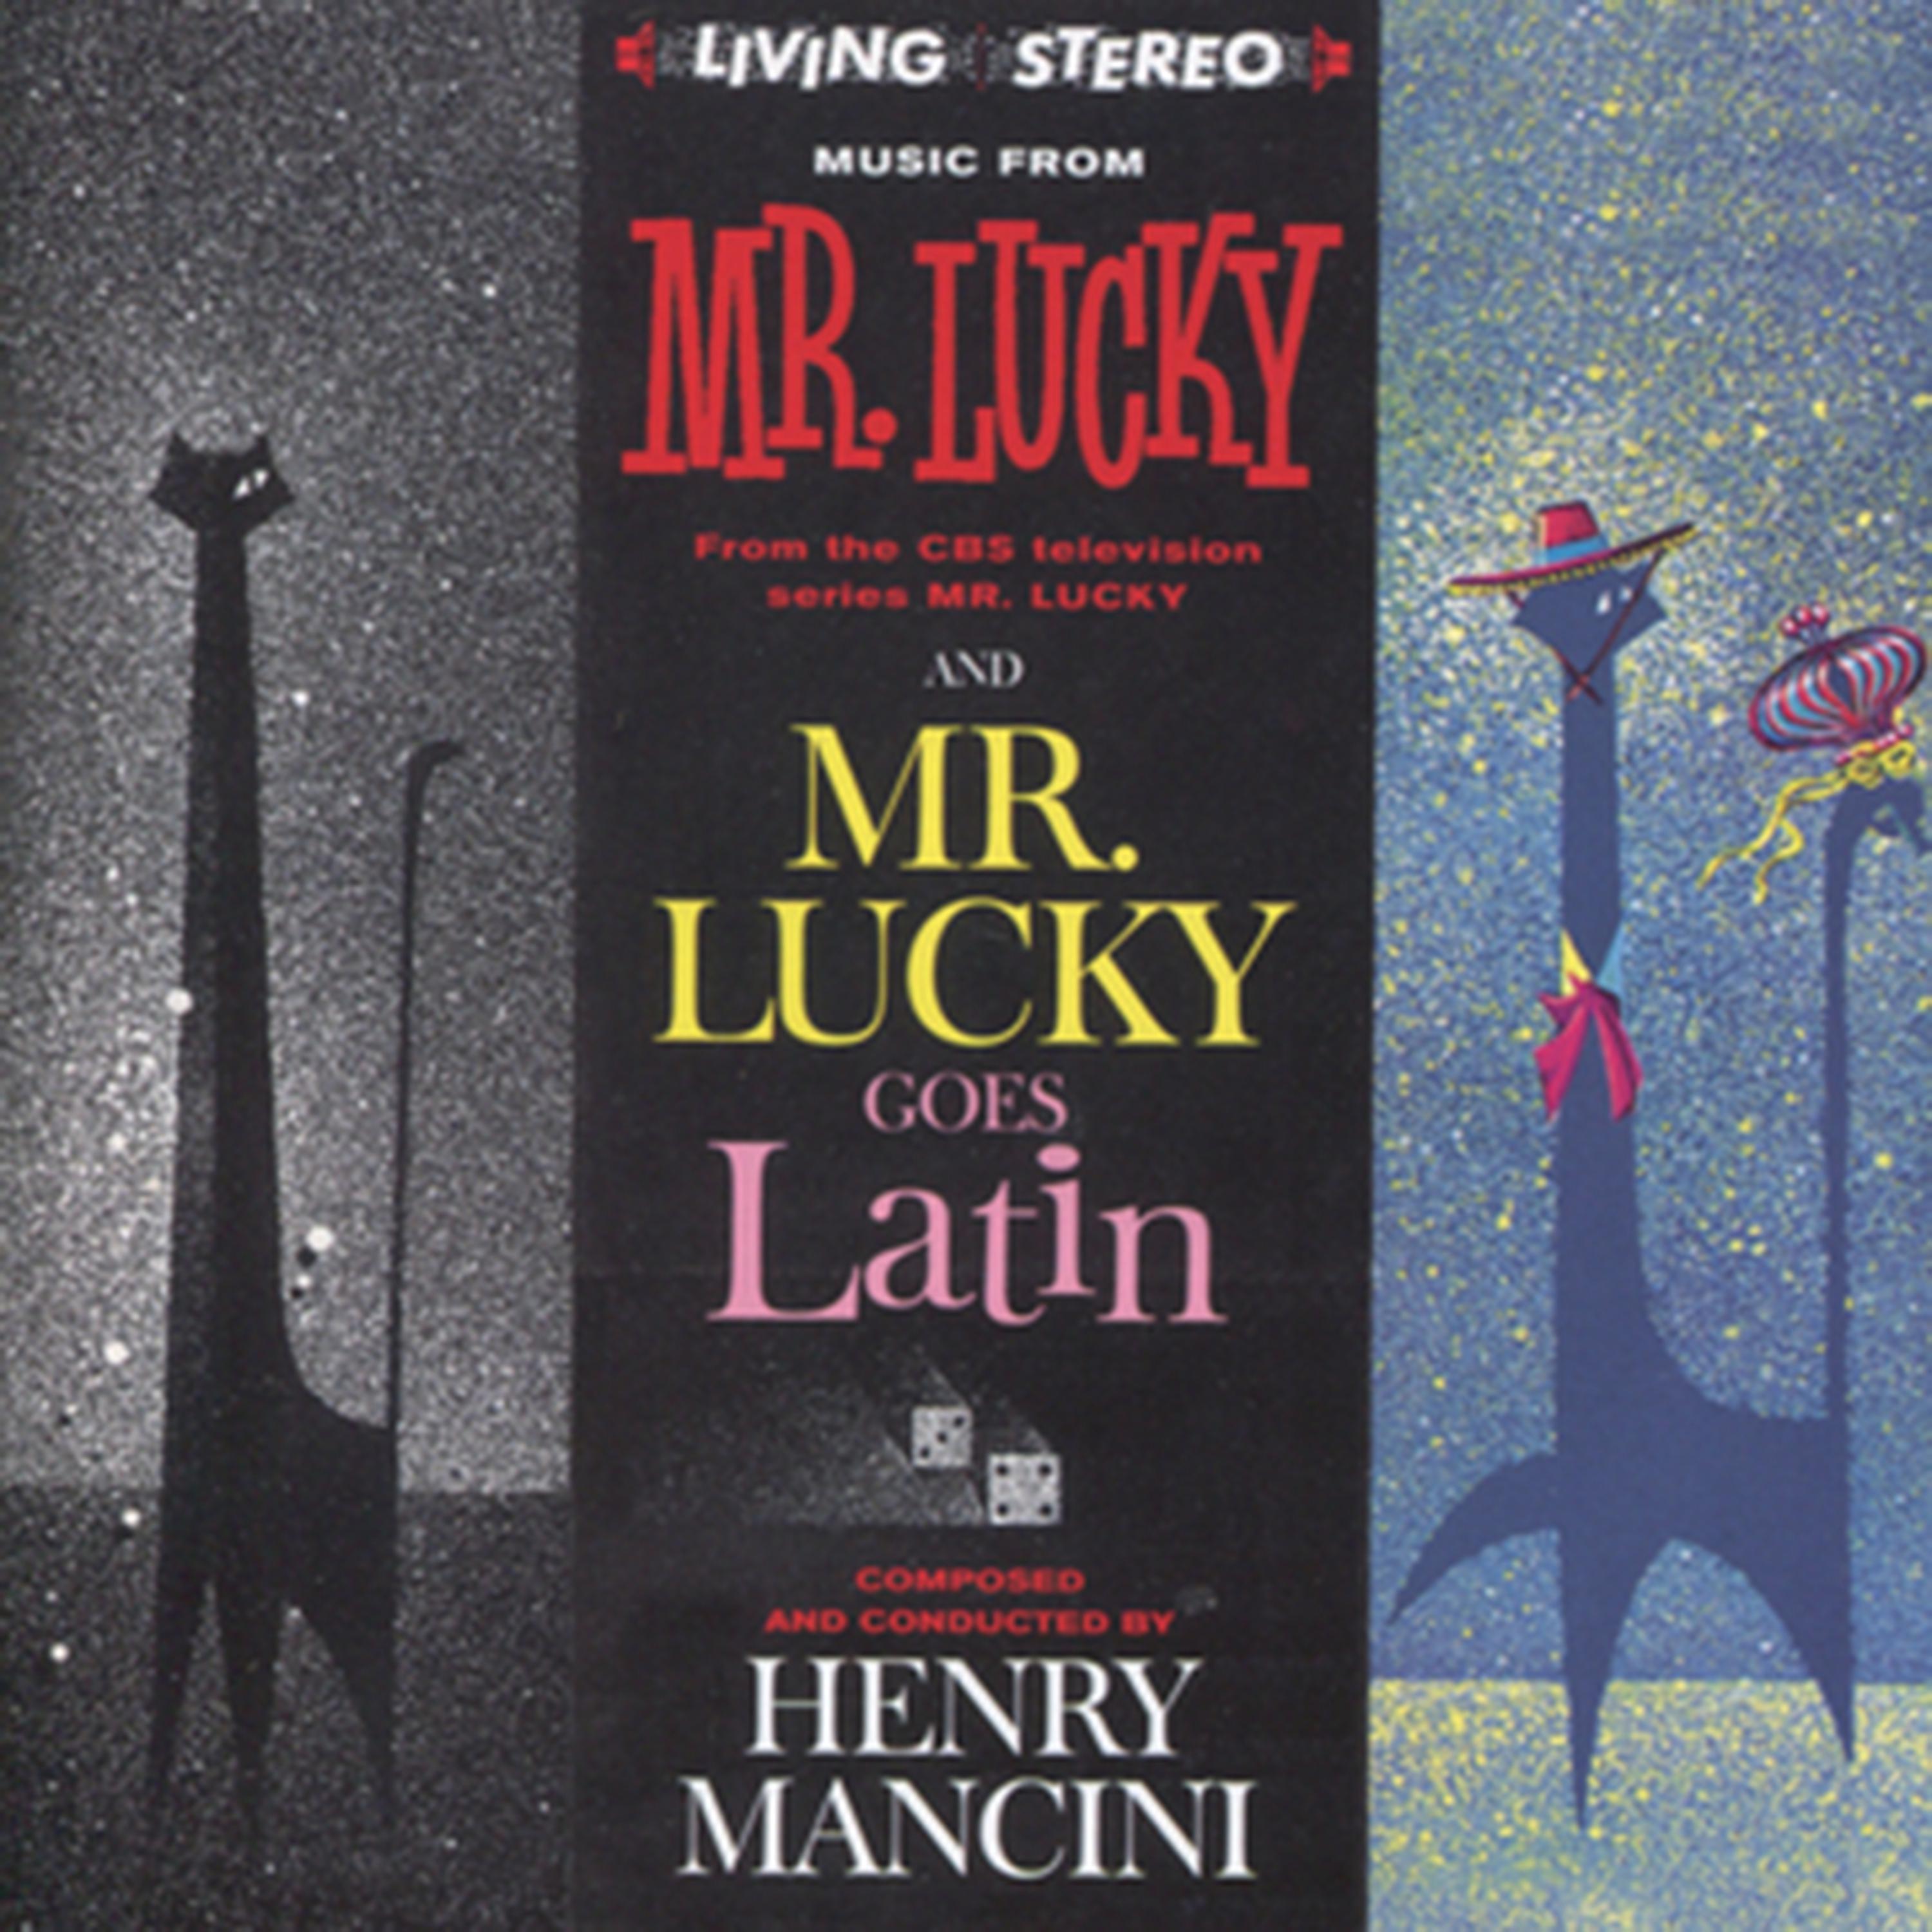 Постер альбома Muisc from Mr. Lucky and Mr. Lucky Goes Latin